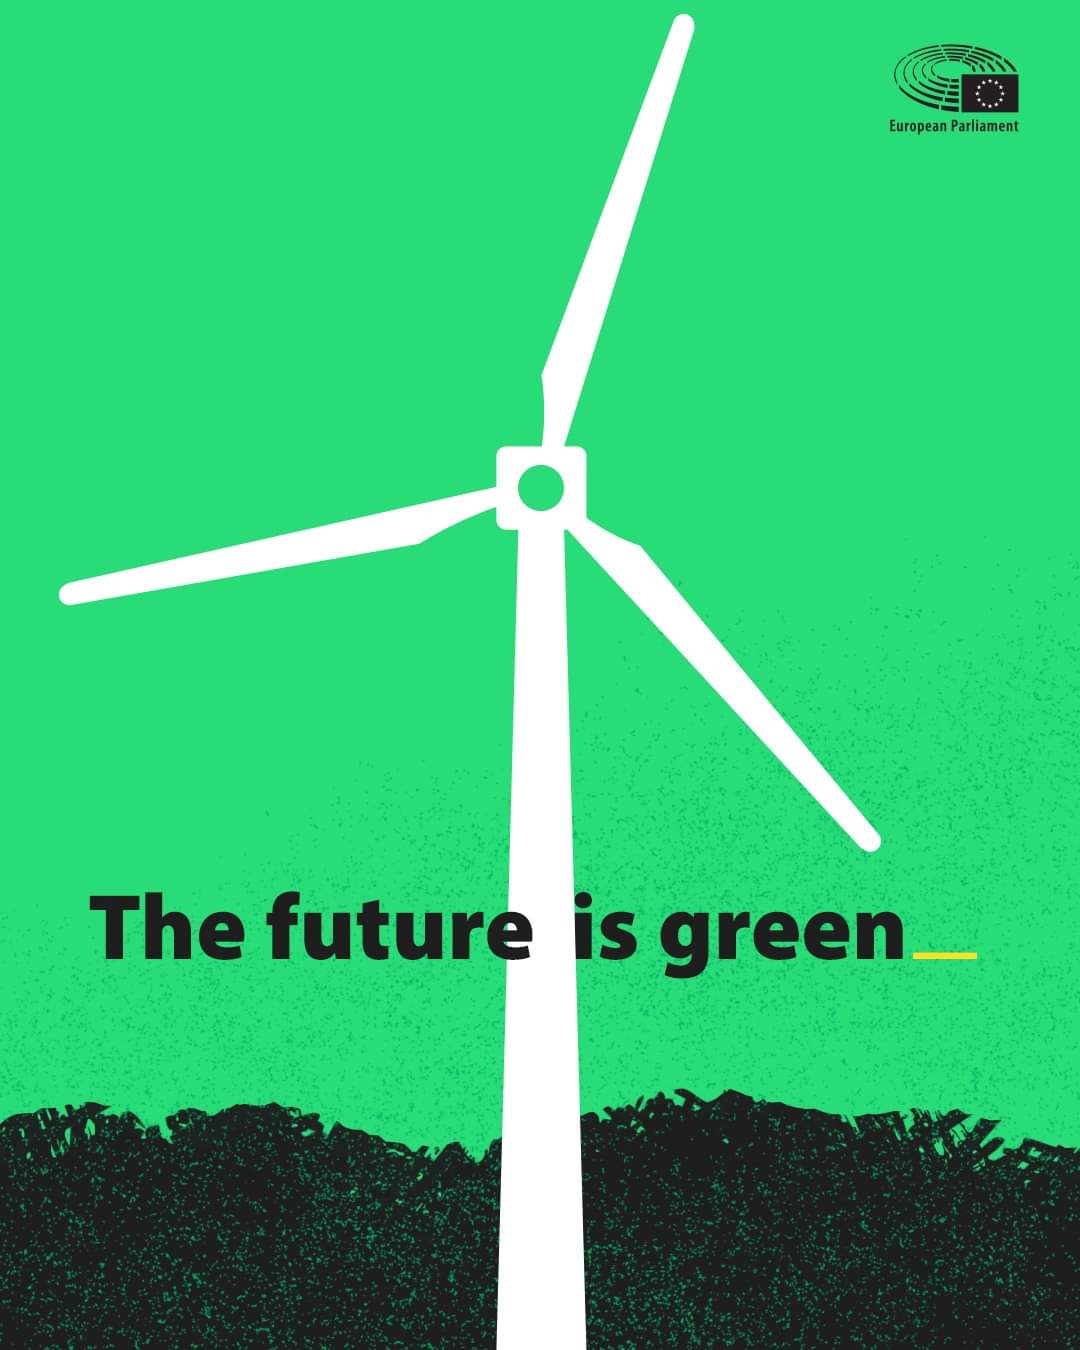 The future is green